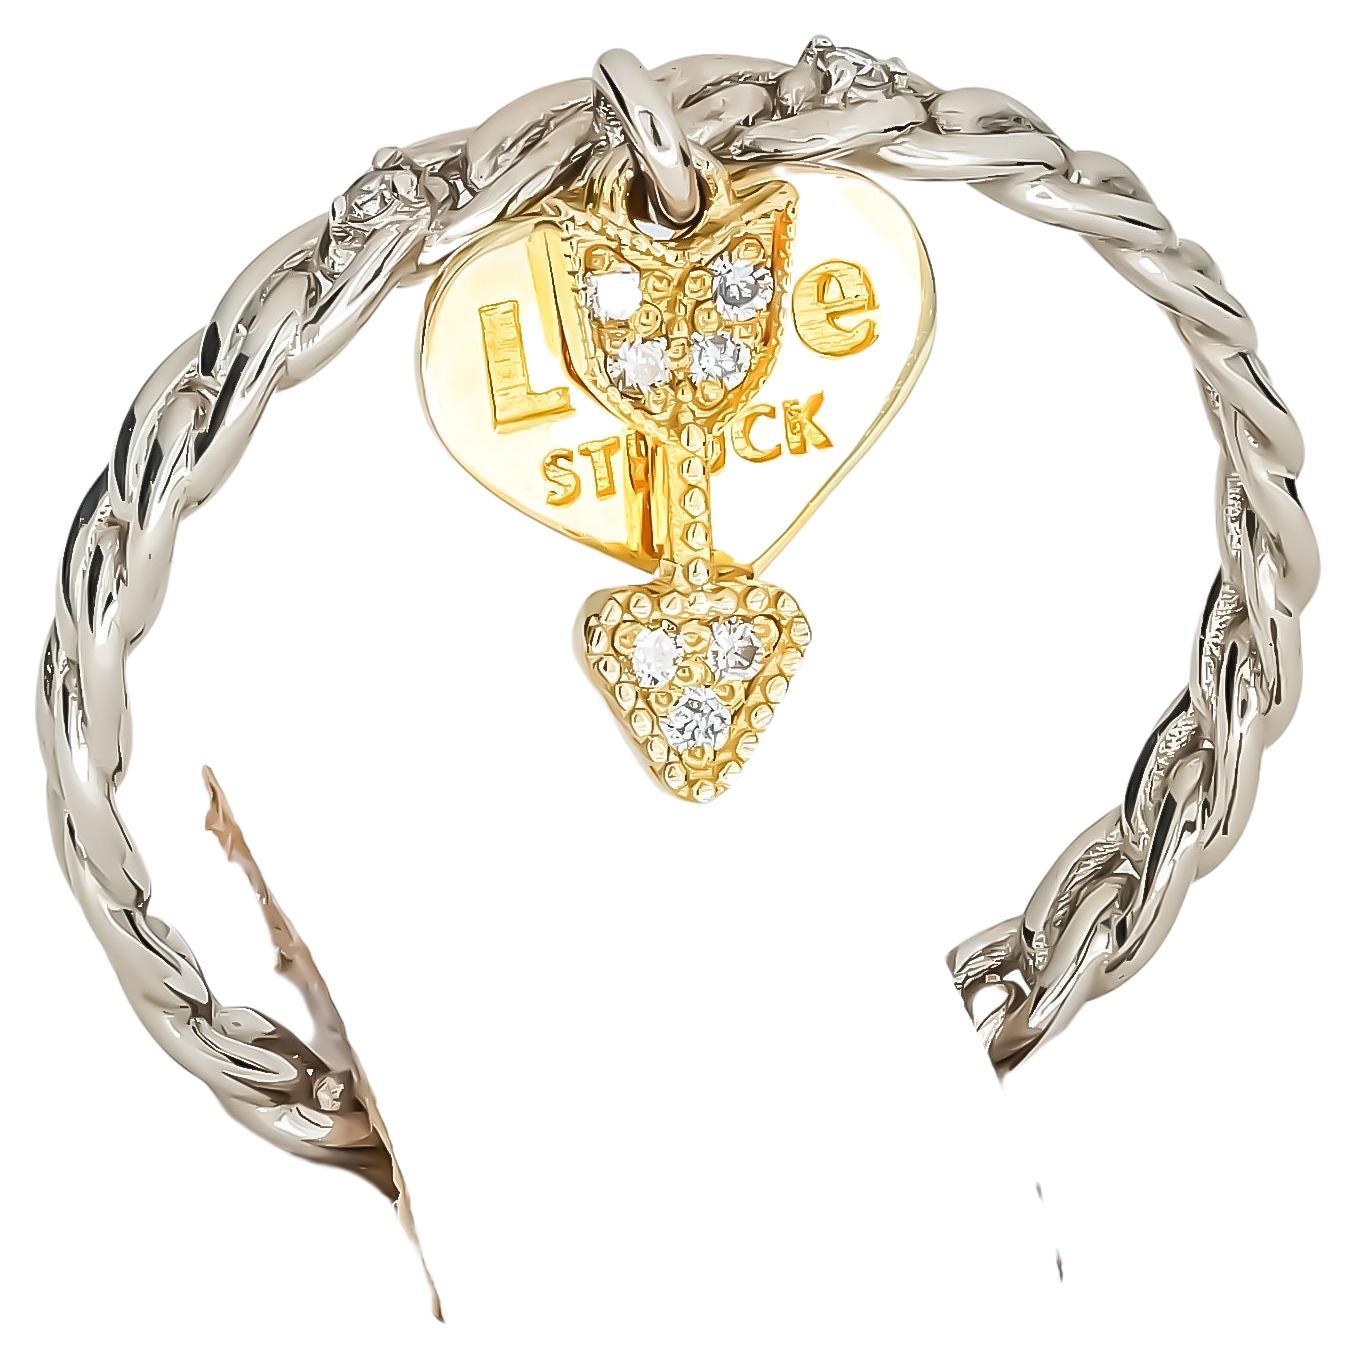 "Heart and Arrow" 14 Karat White and Yellow Gold Ring with Diamonds